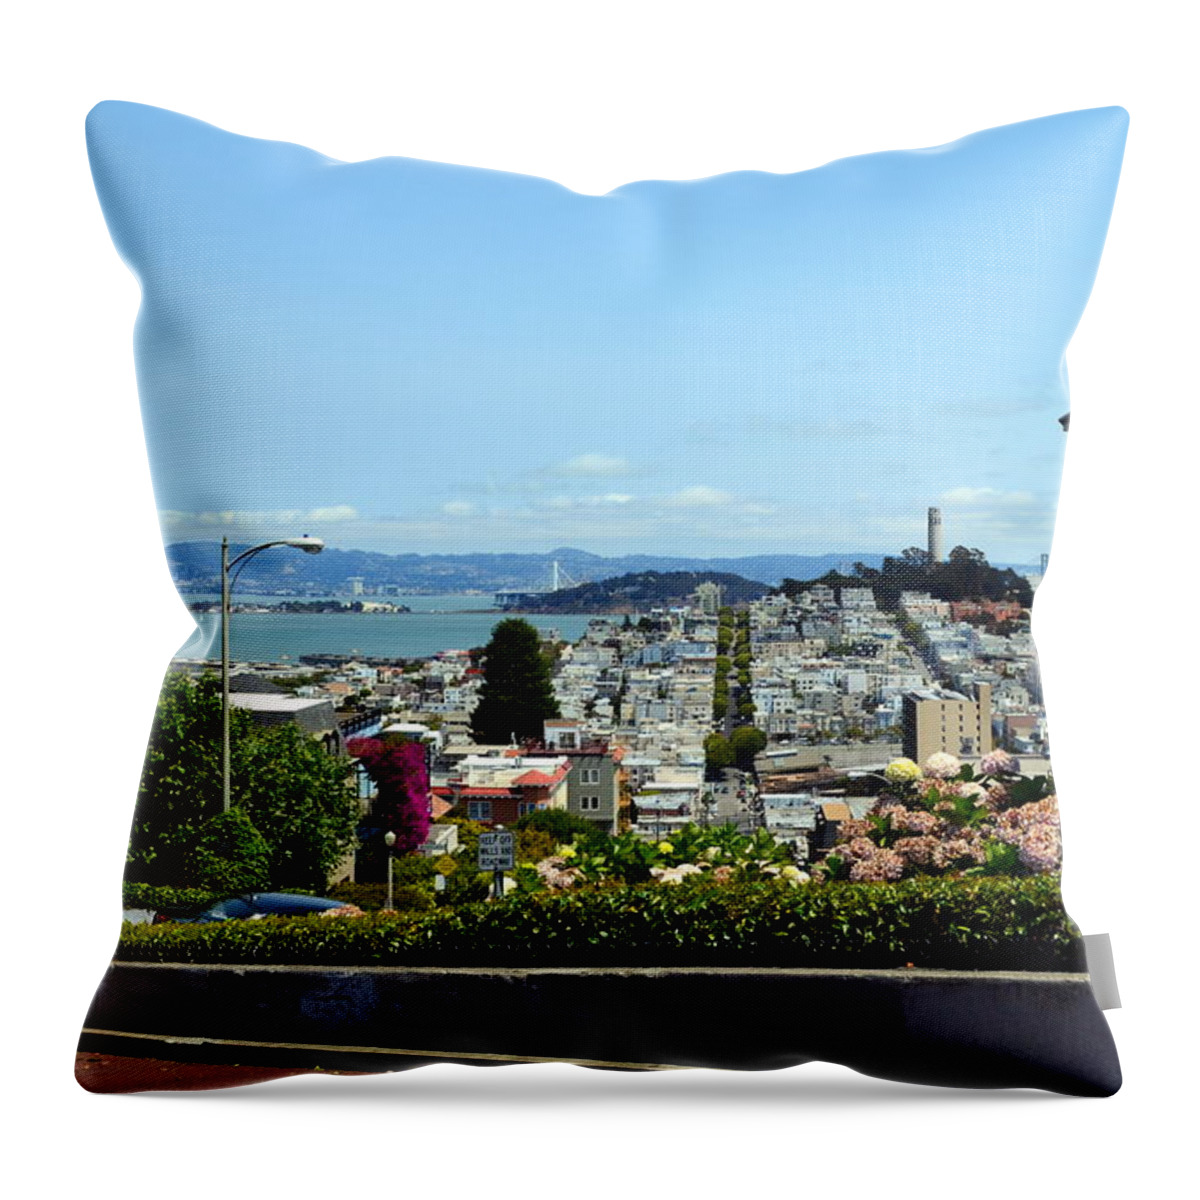 Lombard Street Throw Pillow featuring the photograph At the Top - Lombard Street by Michelle Calkins